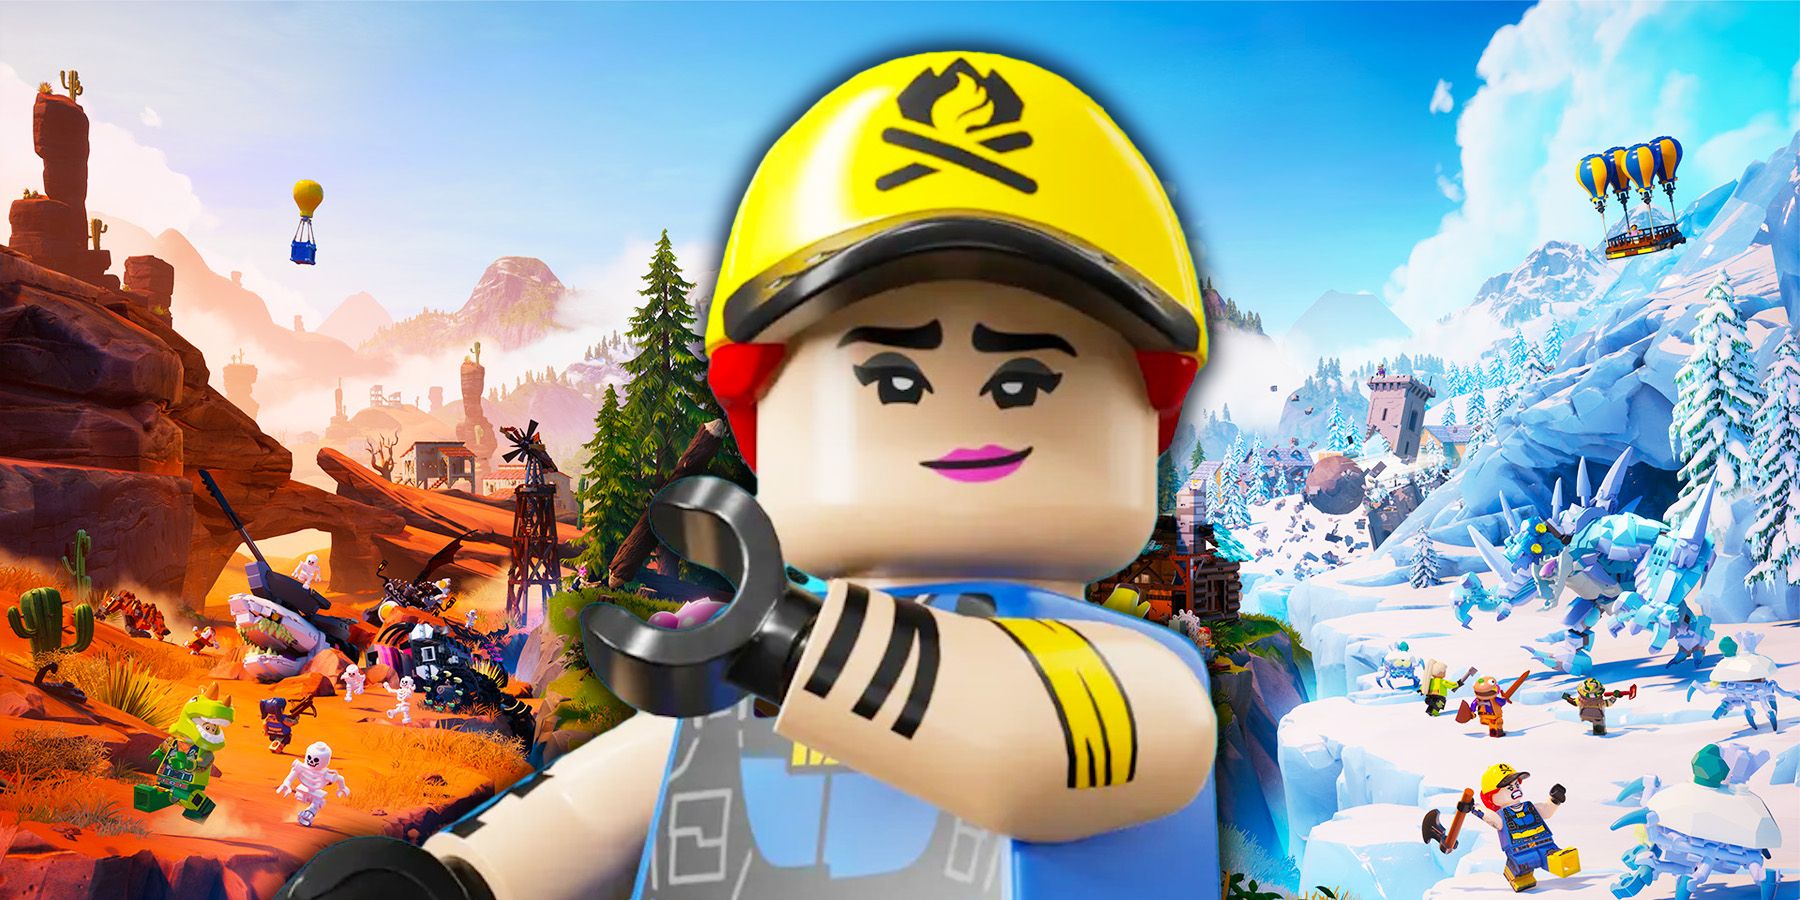 A Female LEGO Minifigure Wearing A Yellow Hard Hat On LEGO Fortnite Desert And Snowcapped Mountains Biome Background